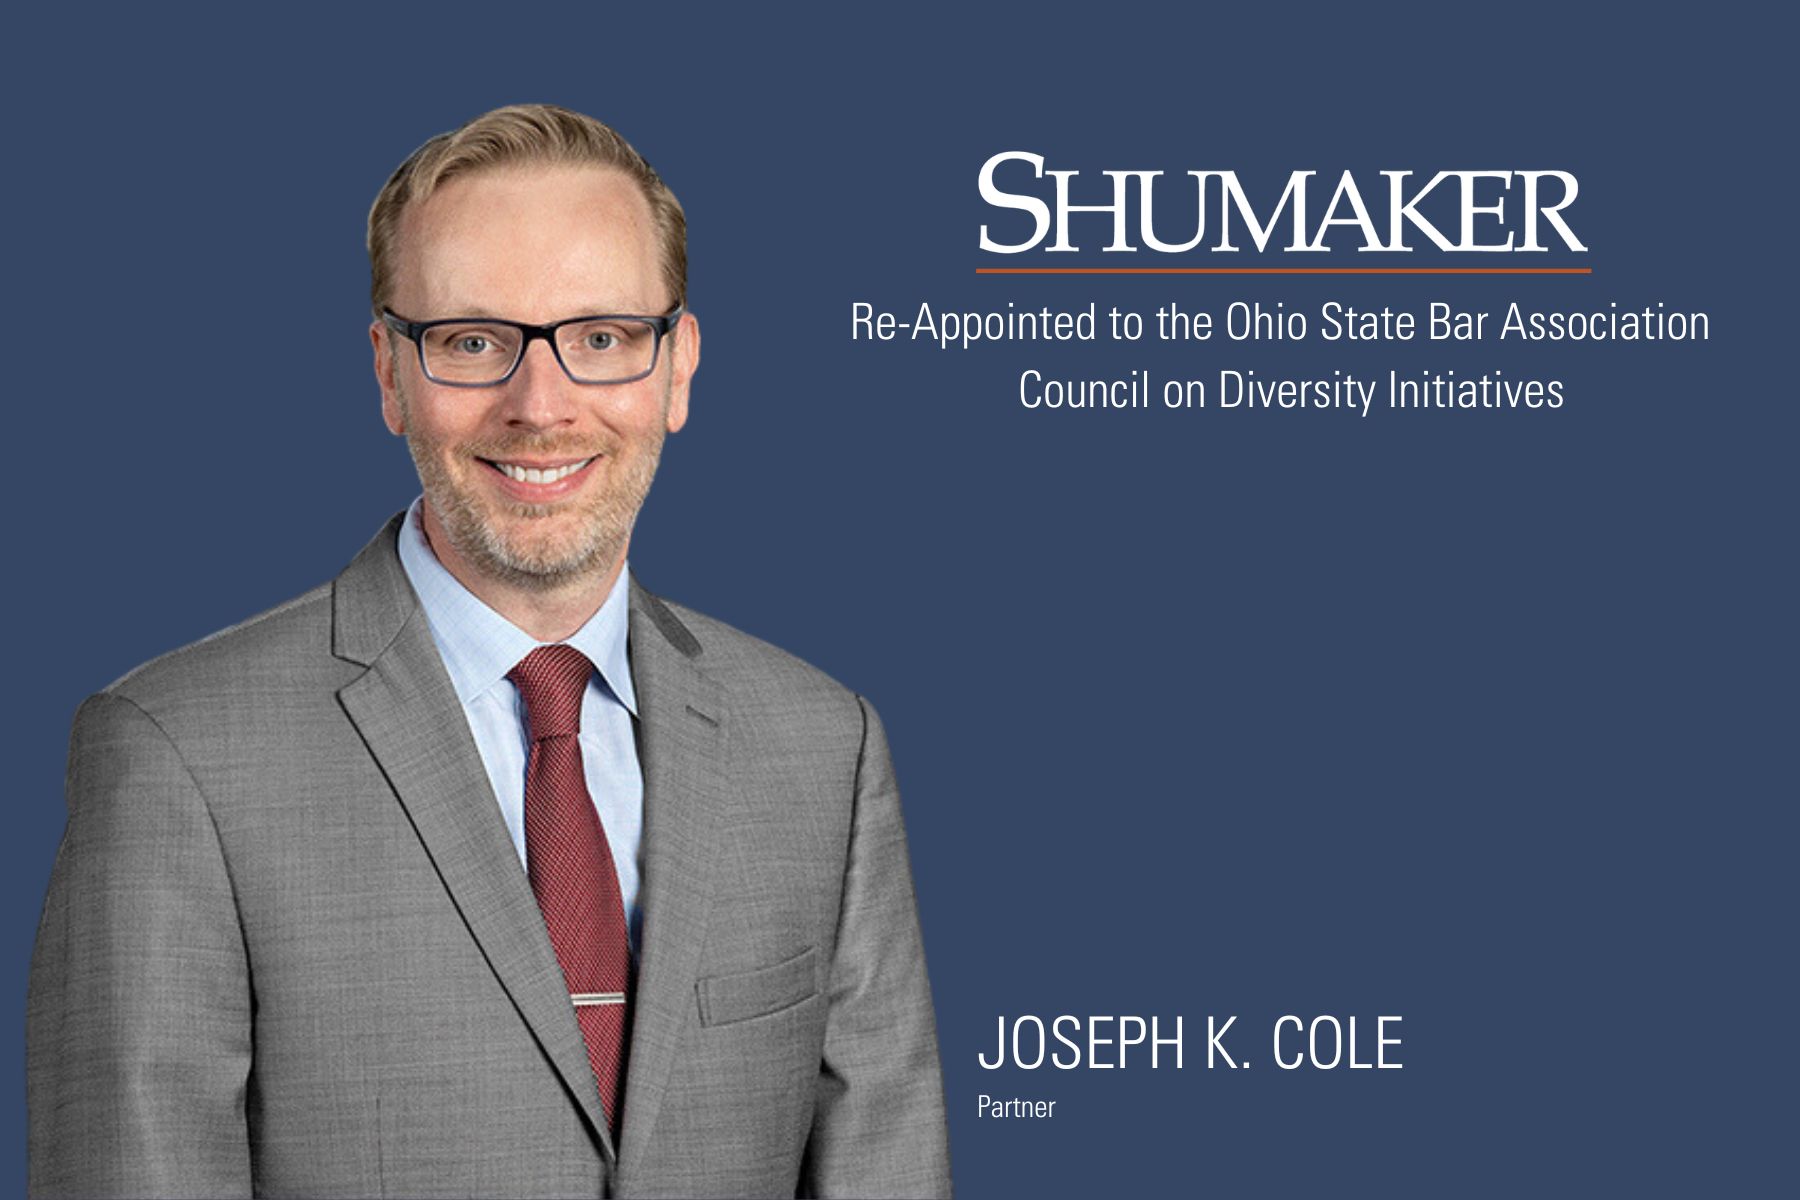 Joseph K. Cole Re-Appointed to the OSBA Council on Diversity Initiatives, Paving the Way for an Inclusive Legal Community